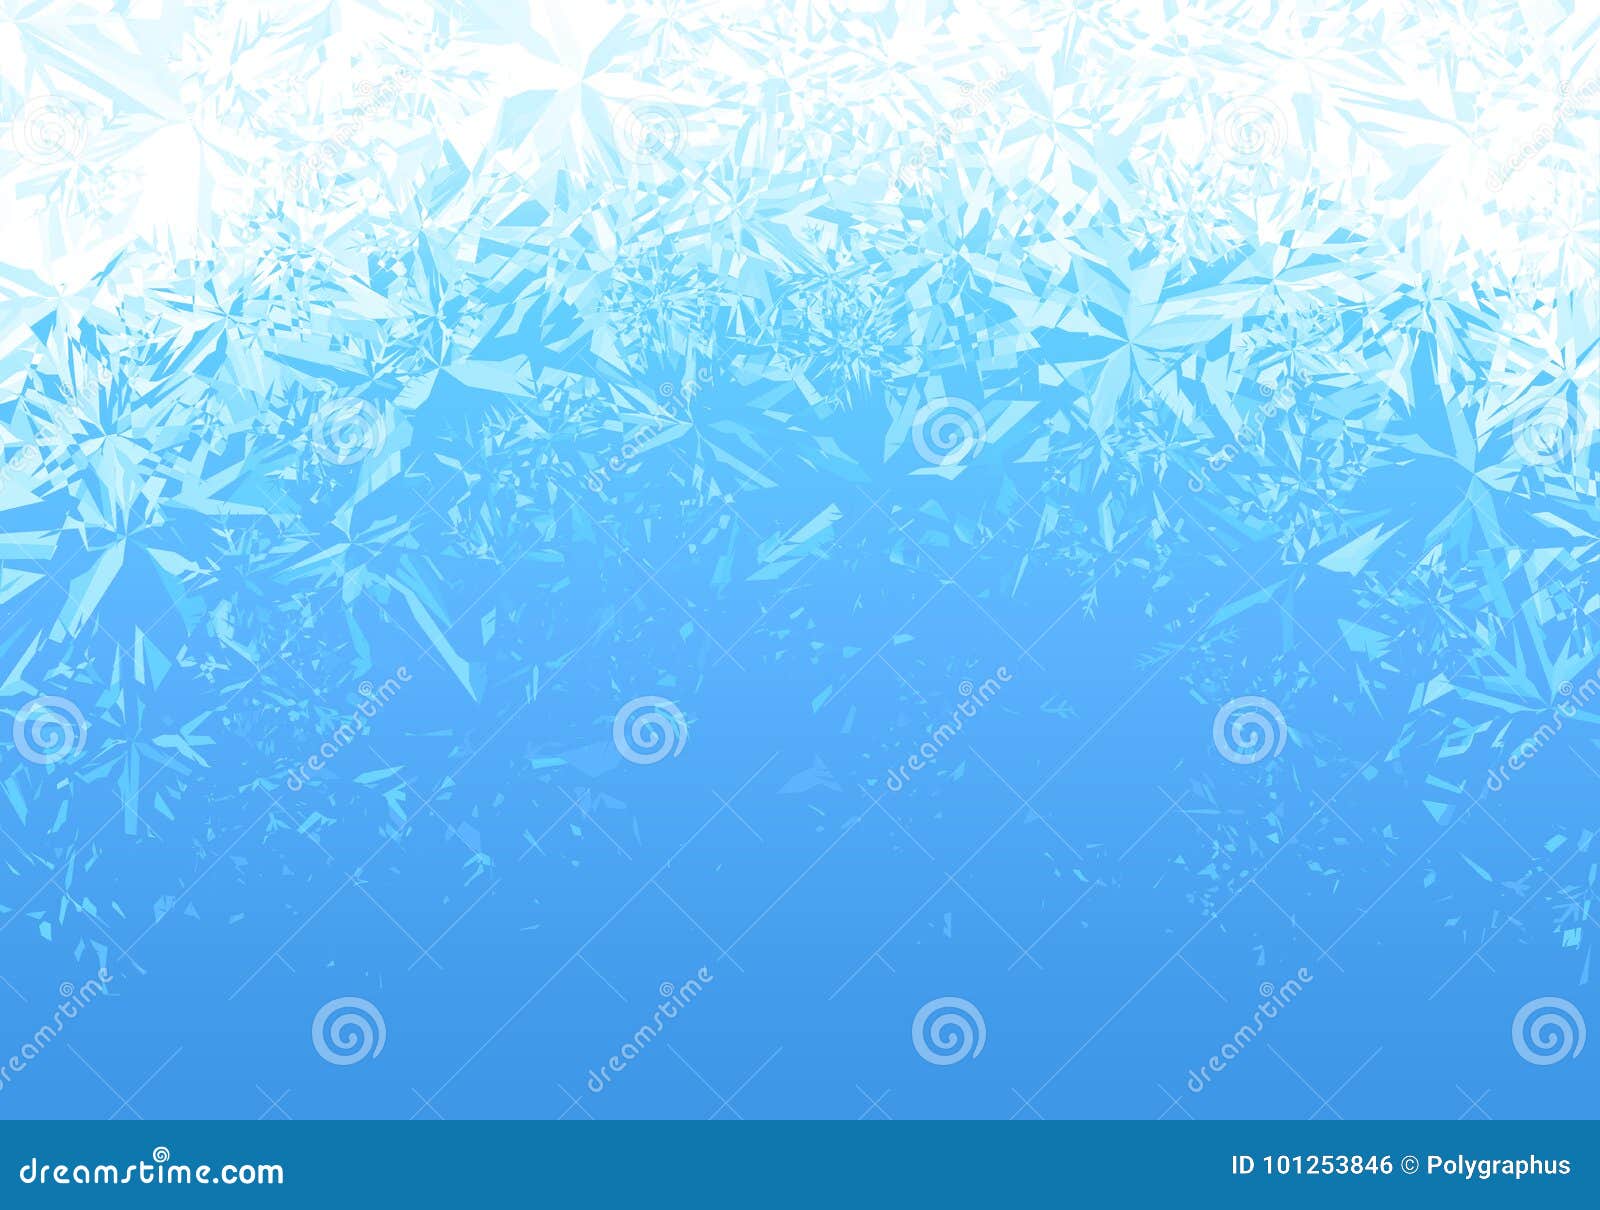 winter blue ice frost background